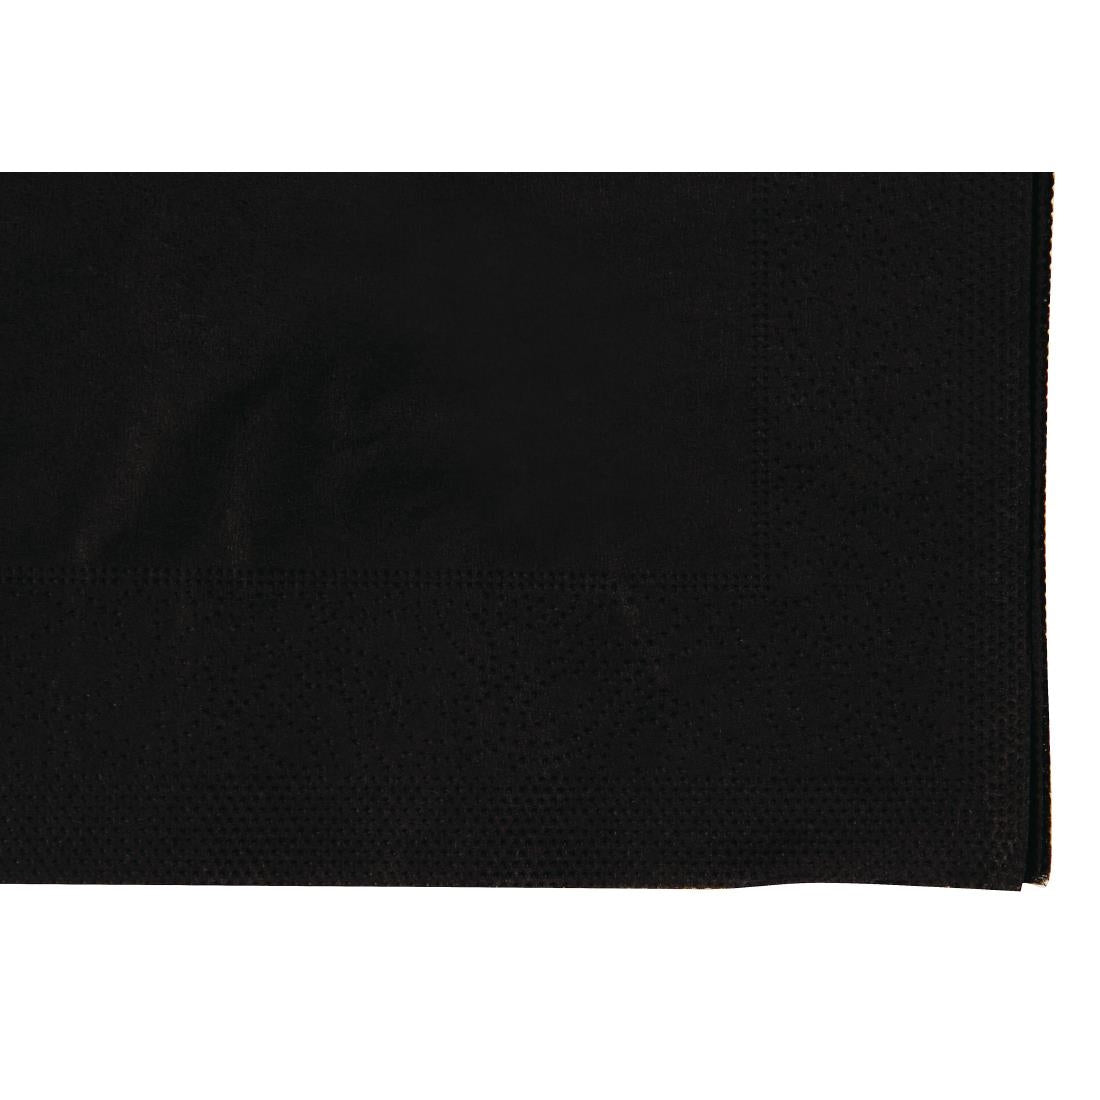 Cocktail Napkins Black 250mm (Pack of 2000) JD Catering Equipment Solutions Ltd